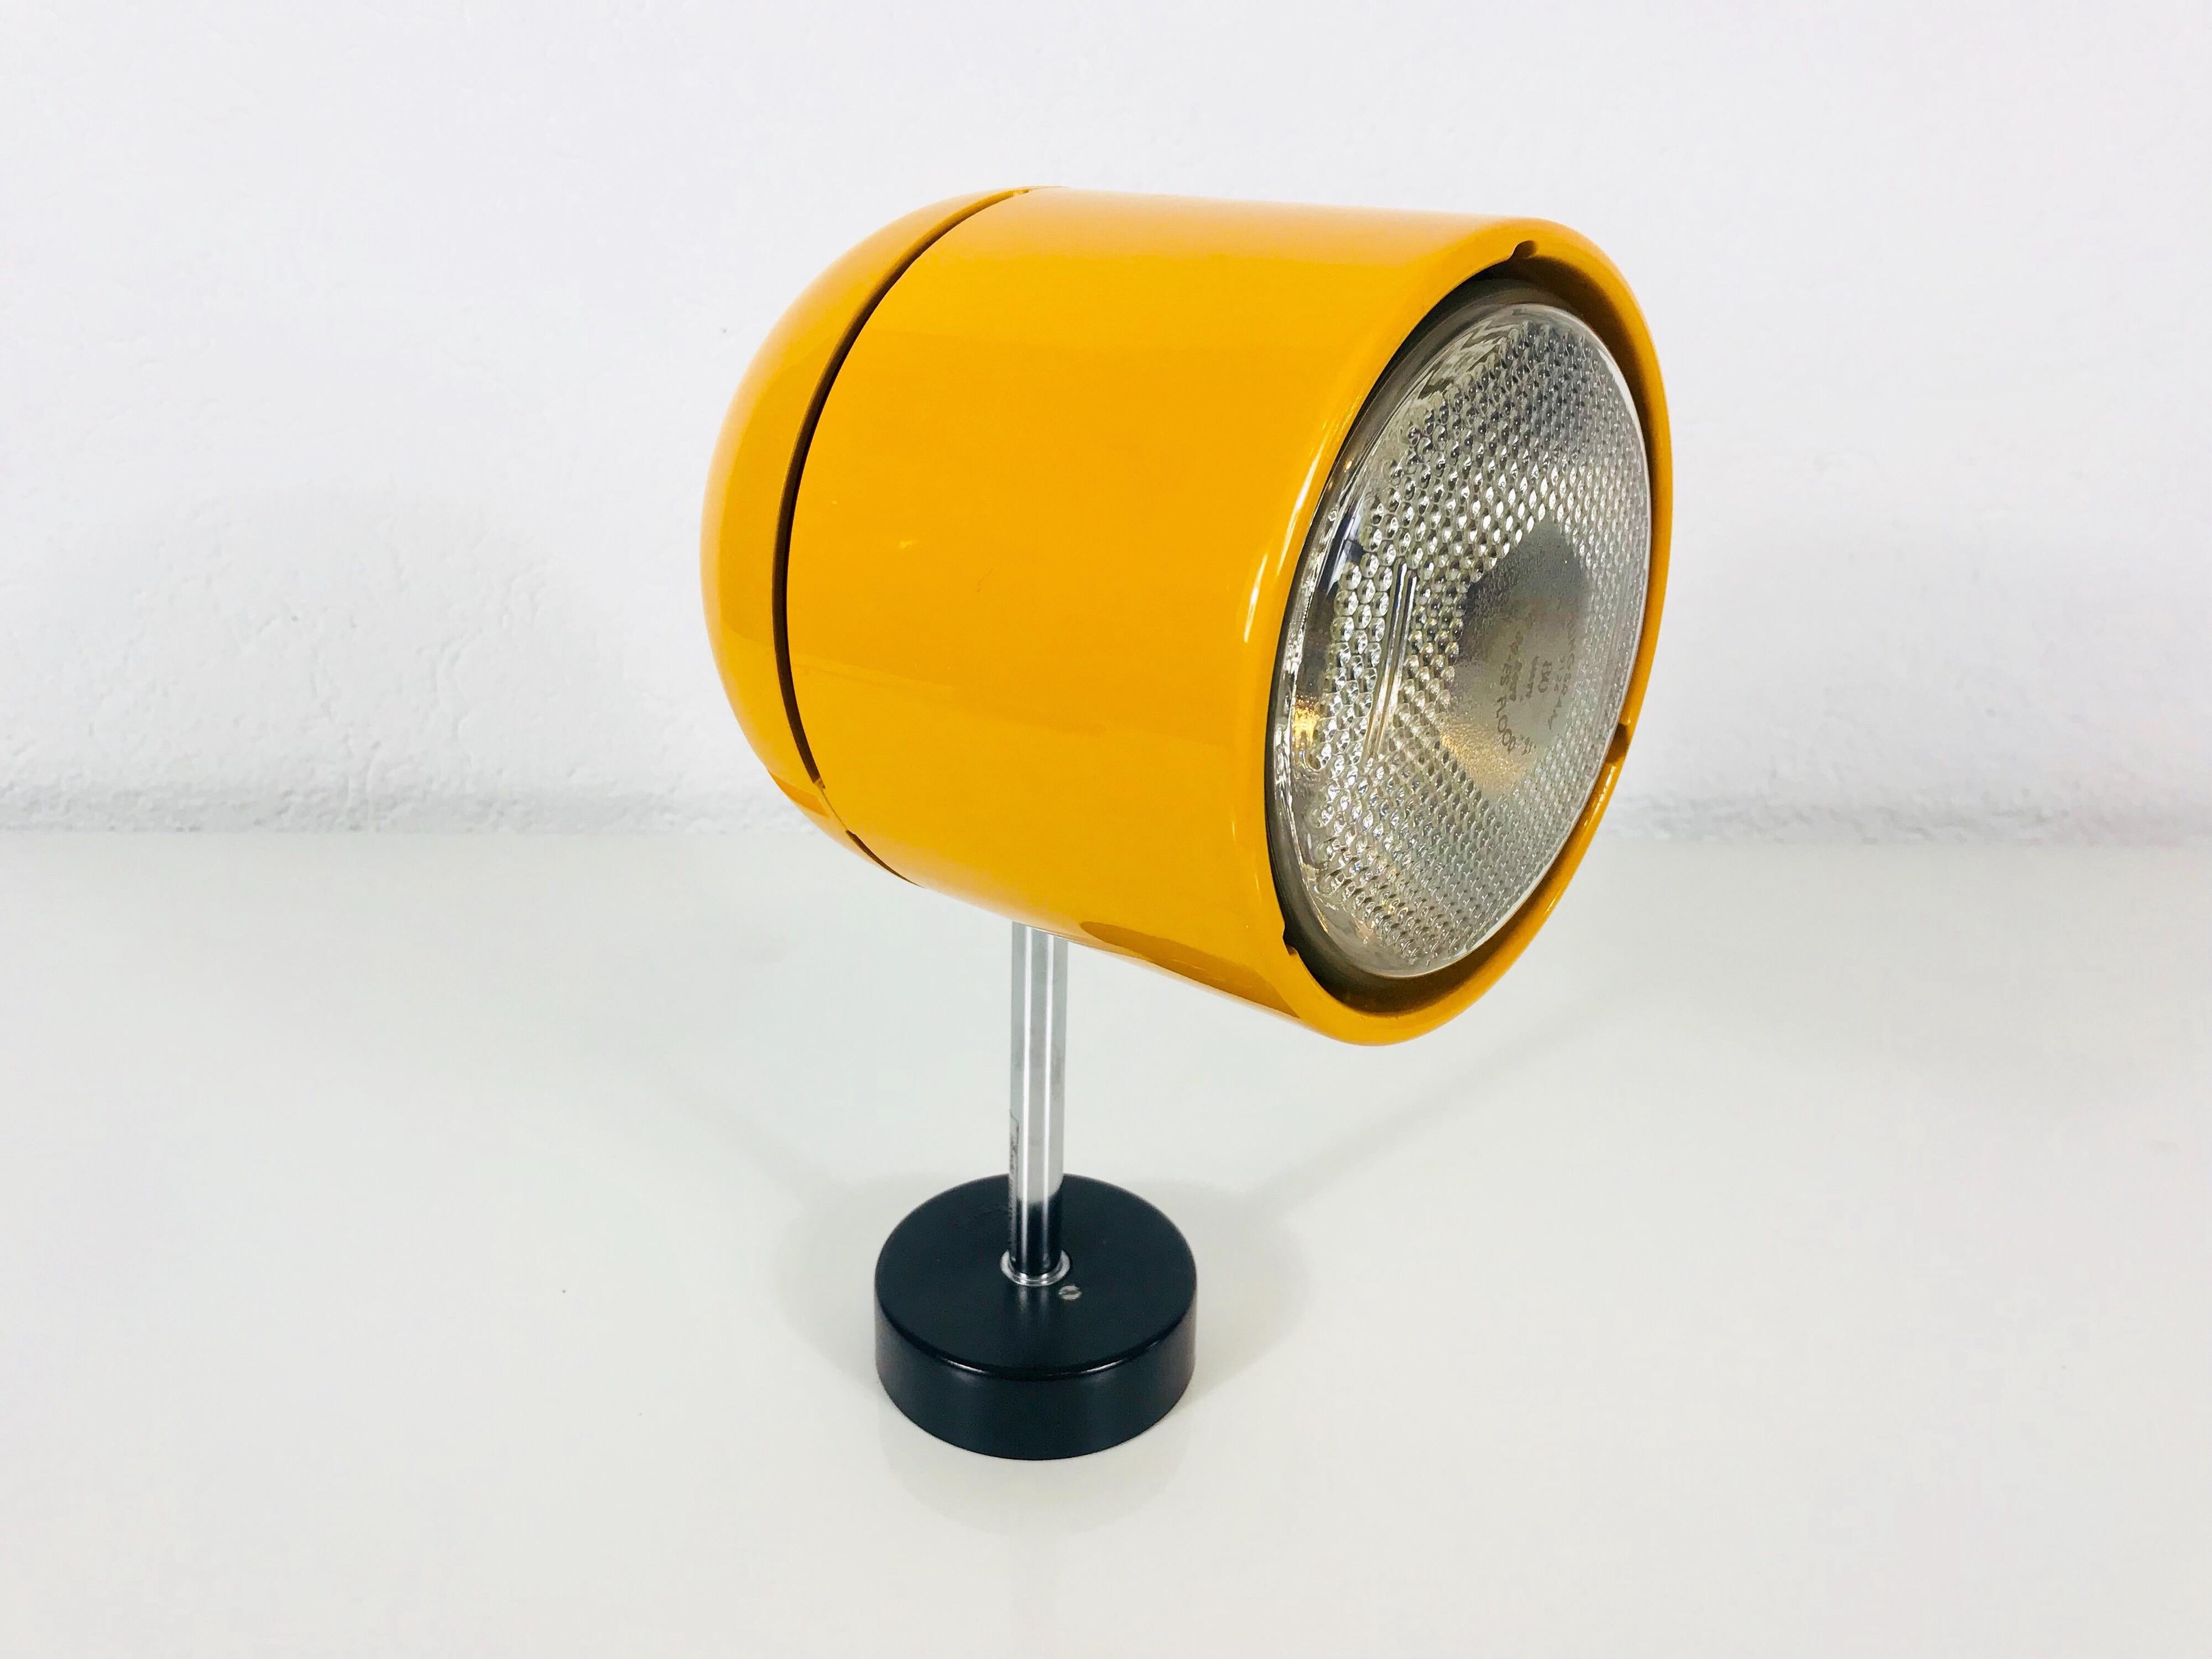 A spot light by Staff Leuchten made in Germany in the 1970s. It has a chrome metal bar with a black bakelit buttom. The top of the lamp has a beautiful orange color and is also metal. 

Measurements:

Height: 28 cm

Width: 14 cm

Depth: 16